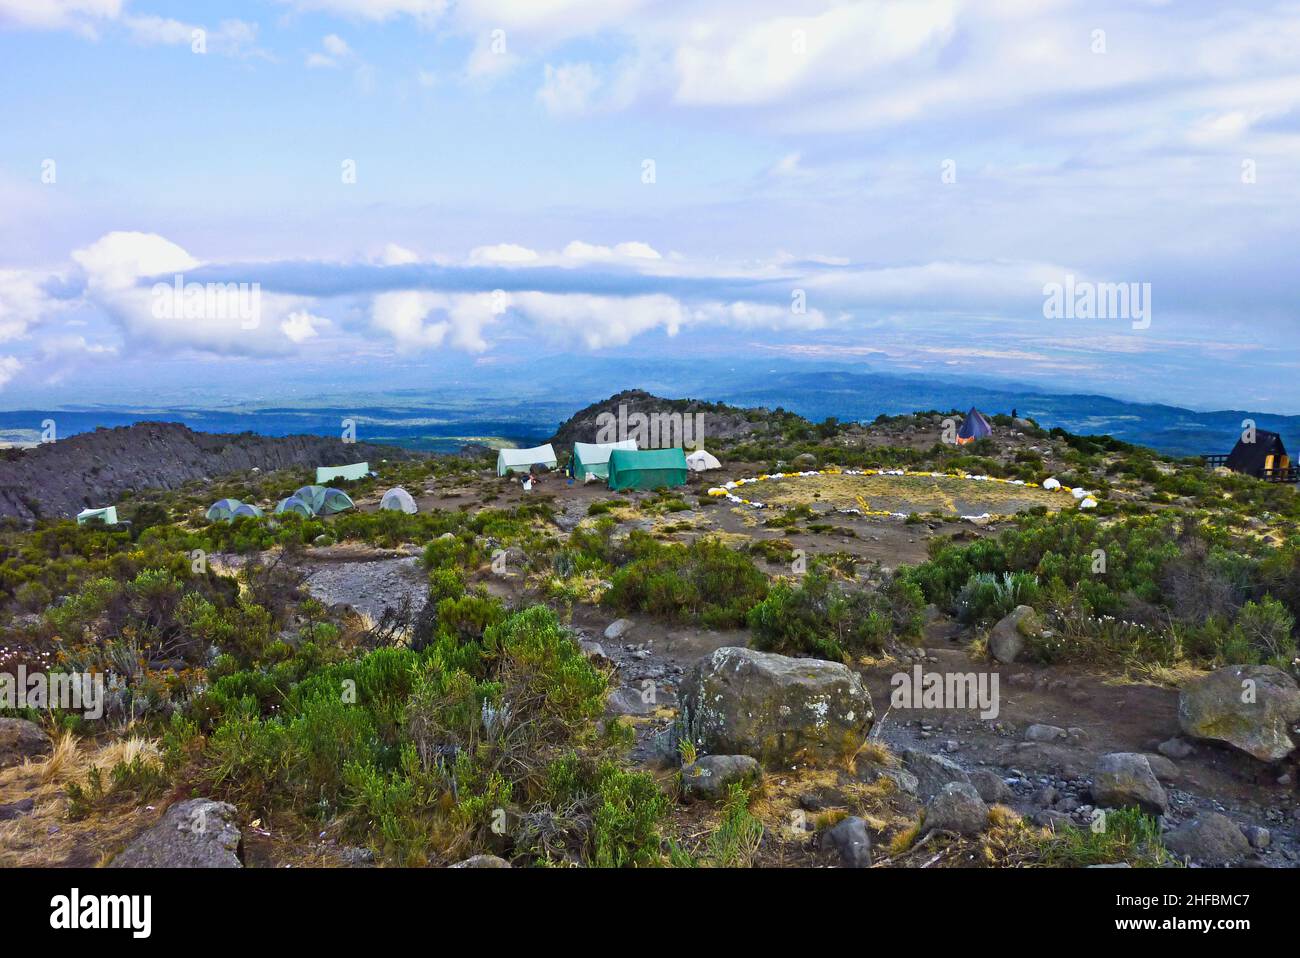 camp with heli landing port at hte Mount Kilimanjaro trail in Africa Stock Photo